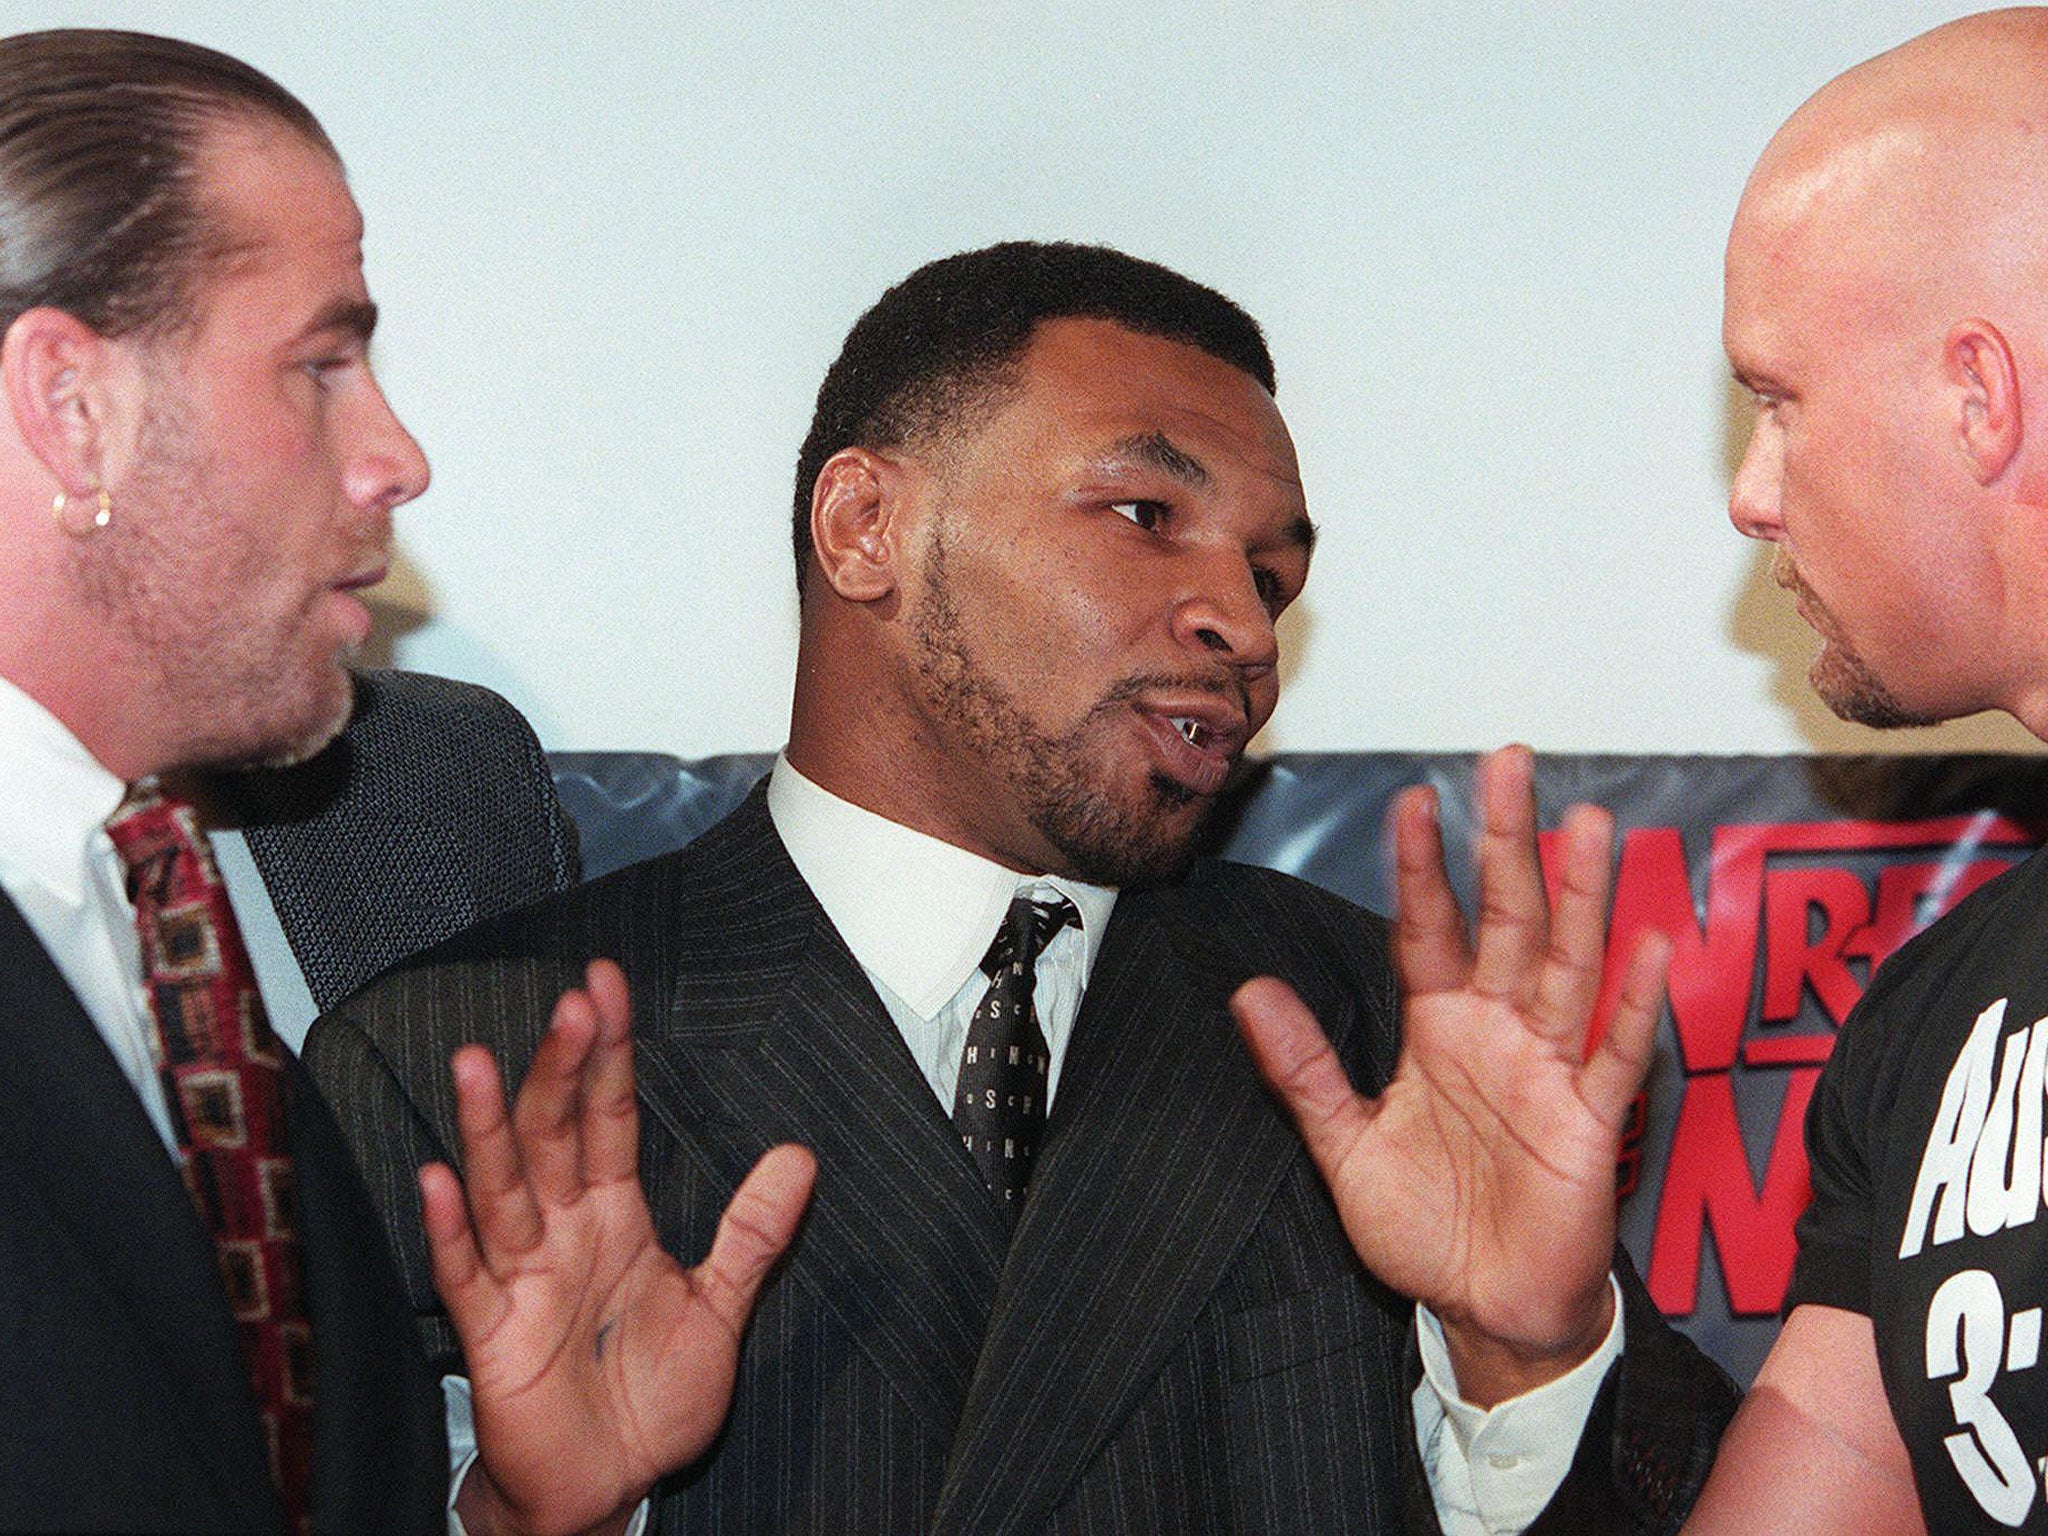 Former world heavyweight boxing champion Mike Tyson (C) acts as a referee between World Wrestling Federation wrestlers Shawn Michaels (L) and Steve Austin